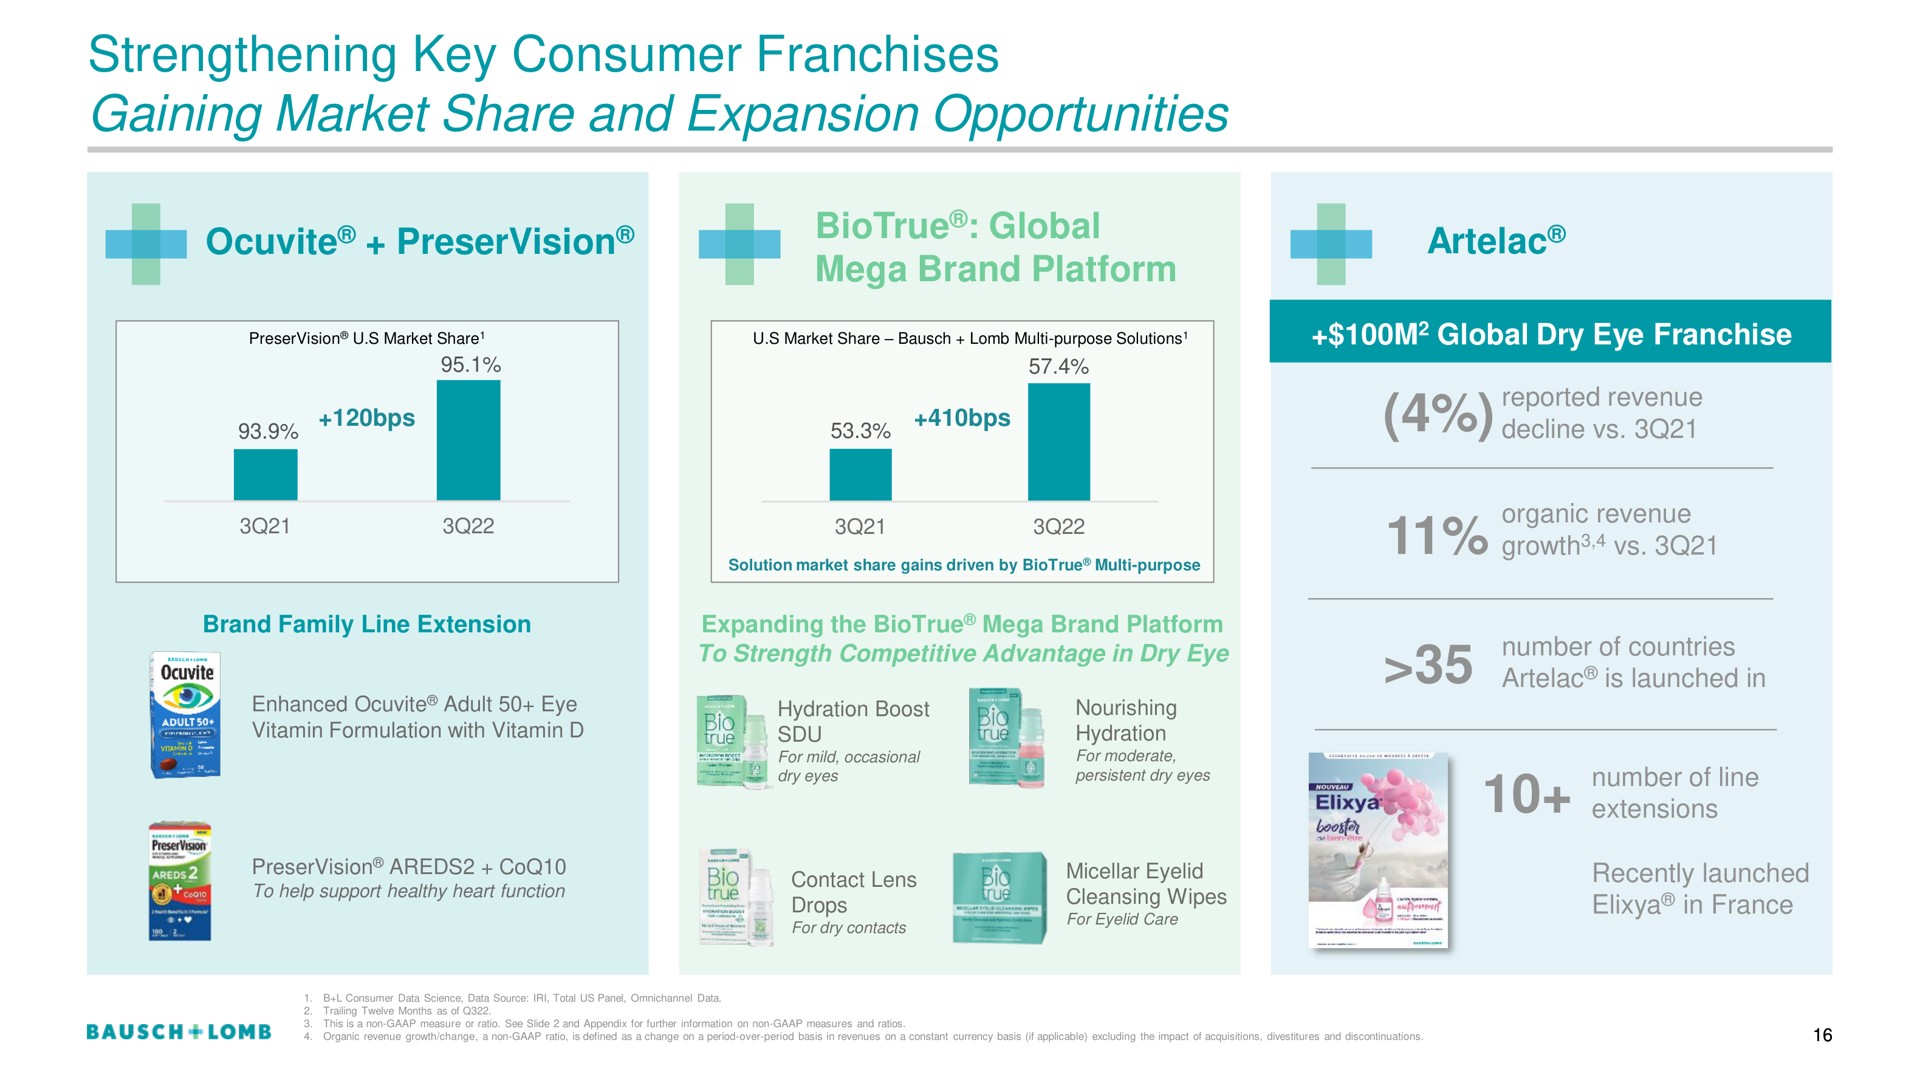 strengthening key consumer franchises gaining market share and expansion opportunities | Bausch+Lomb